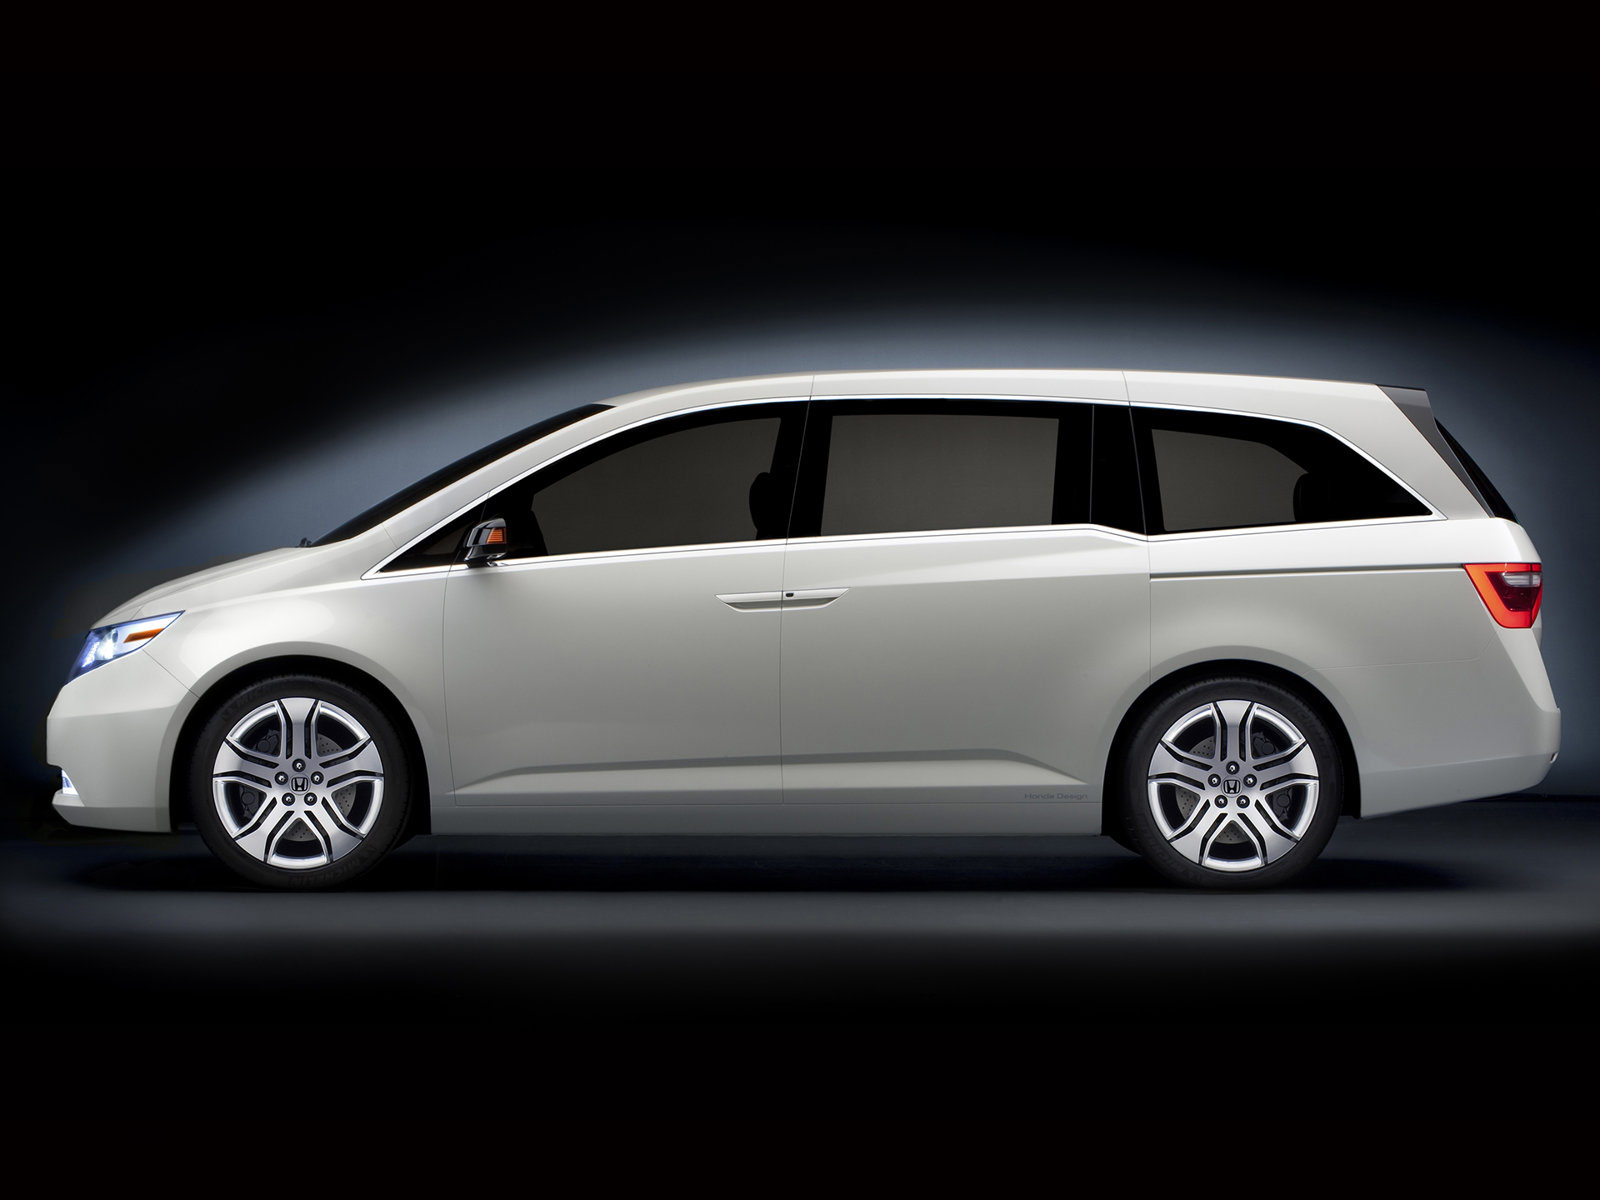 Rate Select Rating Give Honda Odyssey